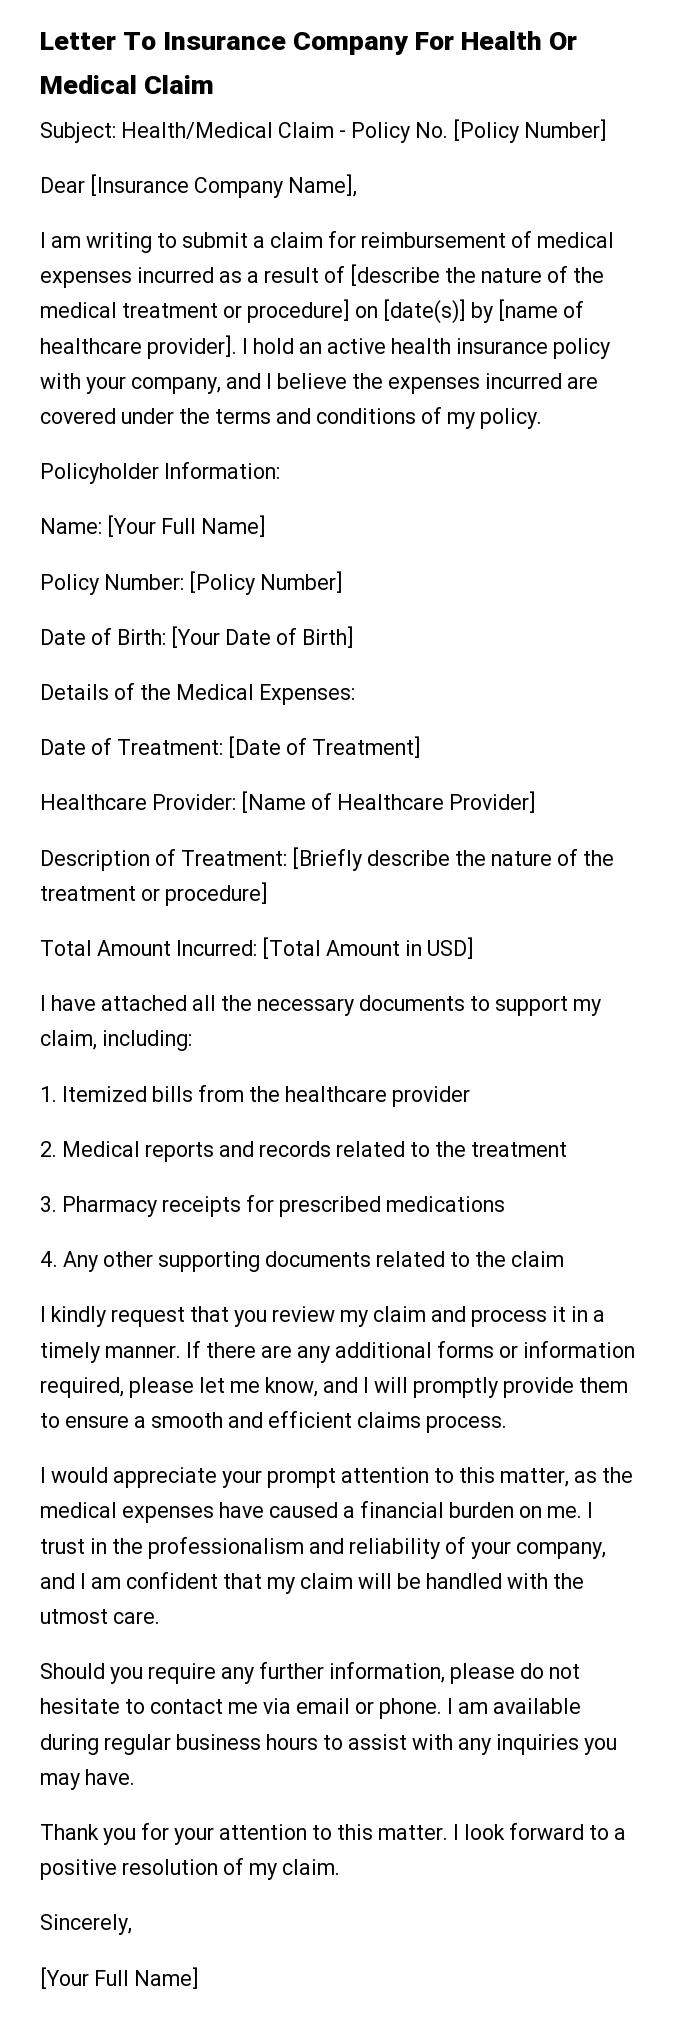 Letter To Insurance Company For Health Or Medical Claim